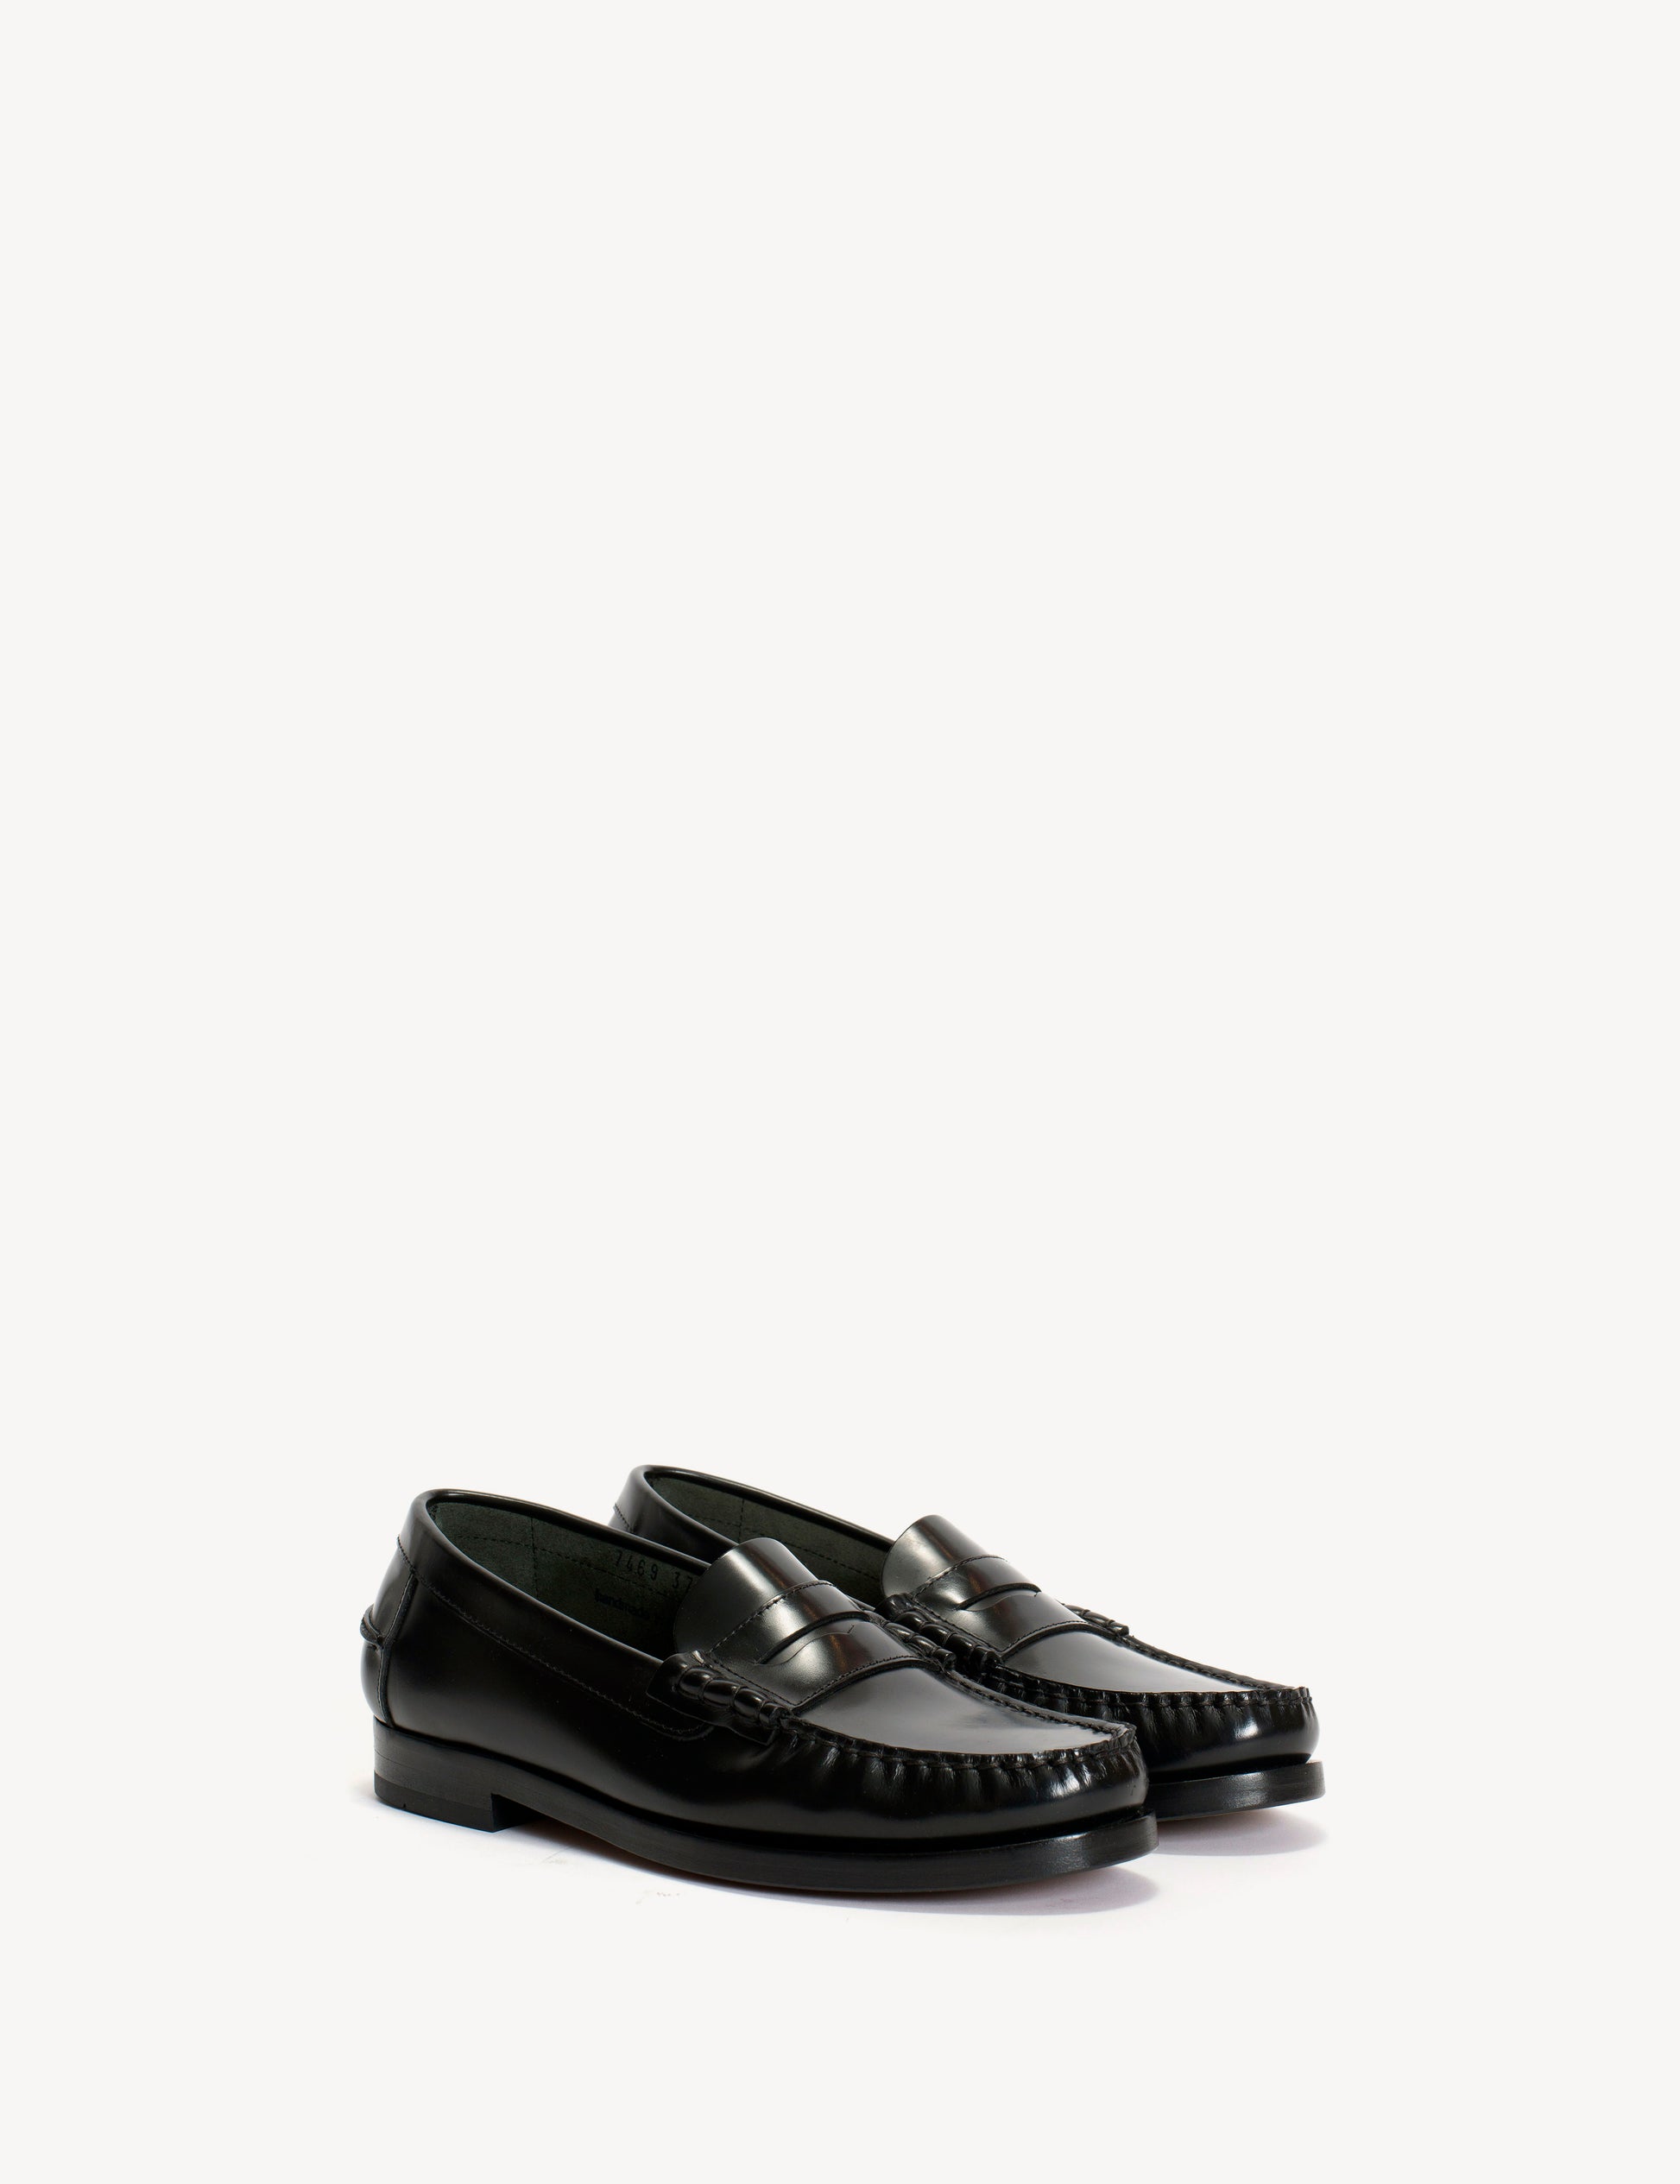 Moccasin Penny Loafer In Black Polido Leather - Dico Copenhagen